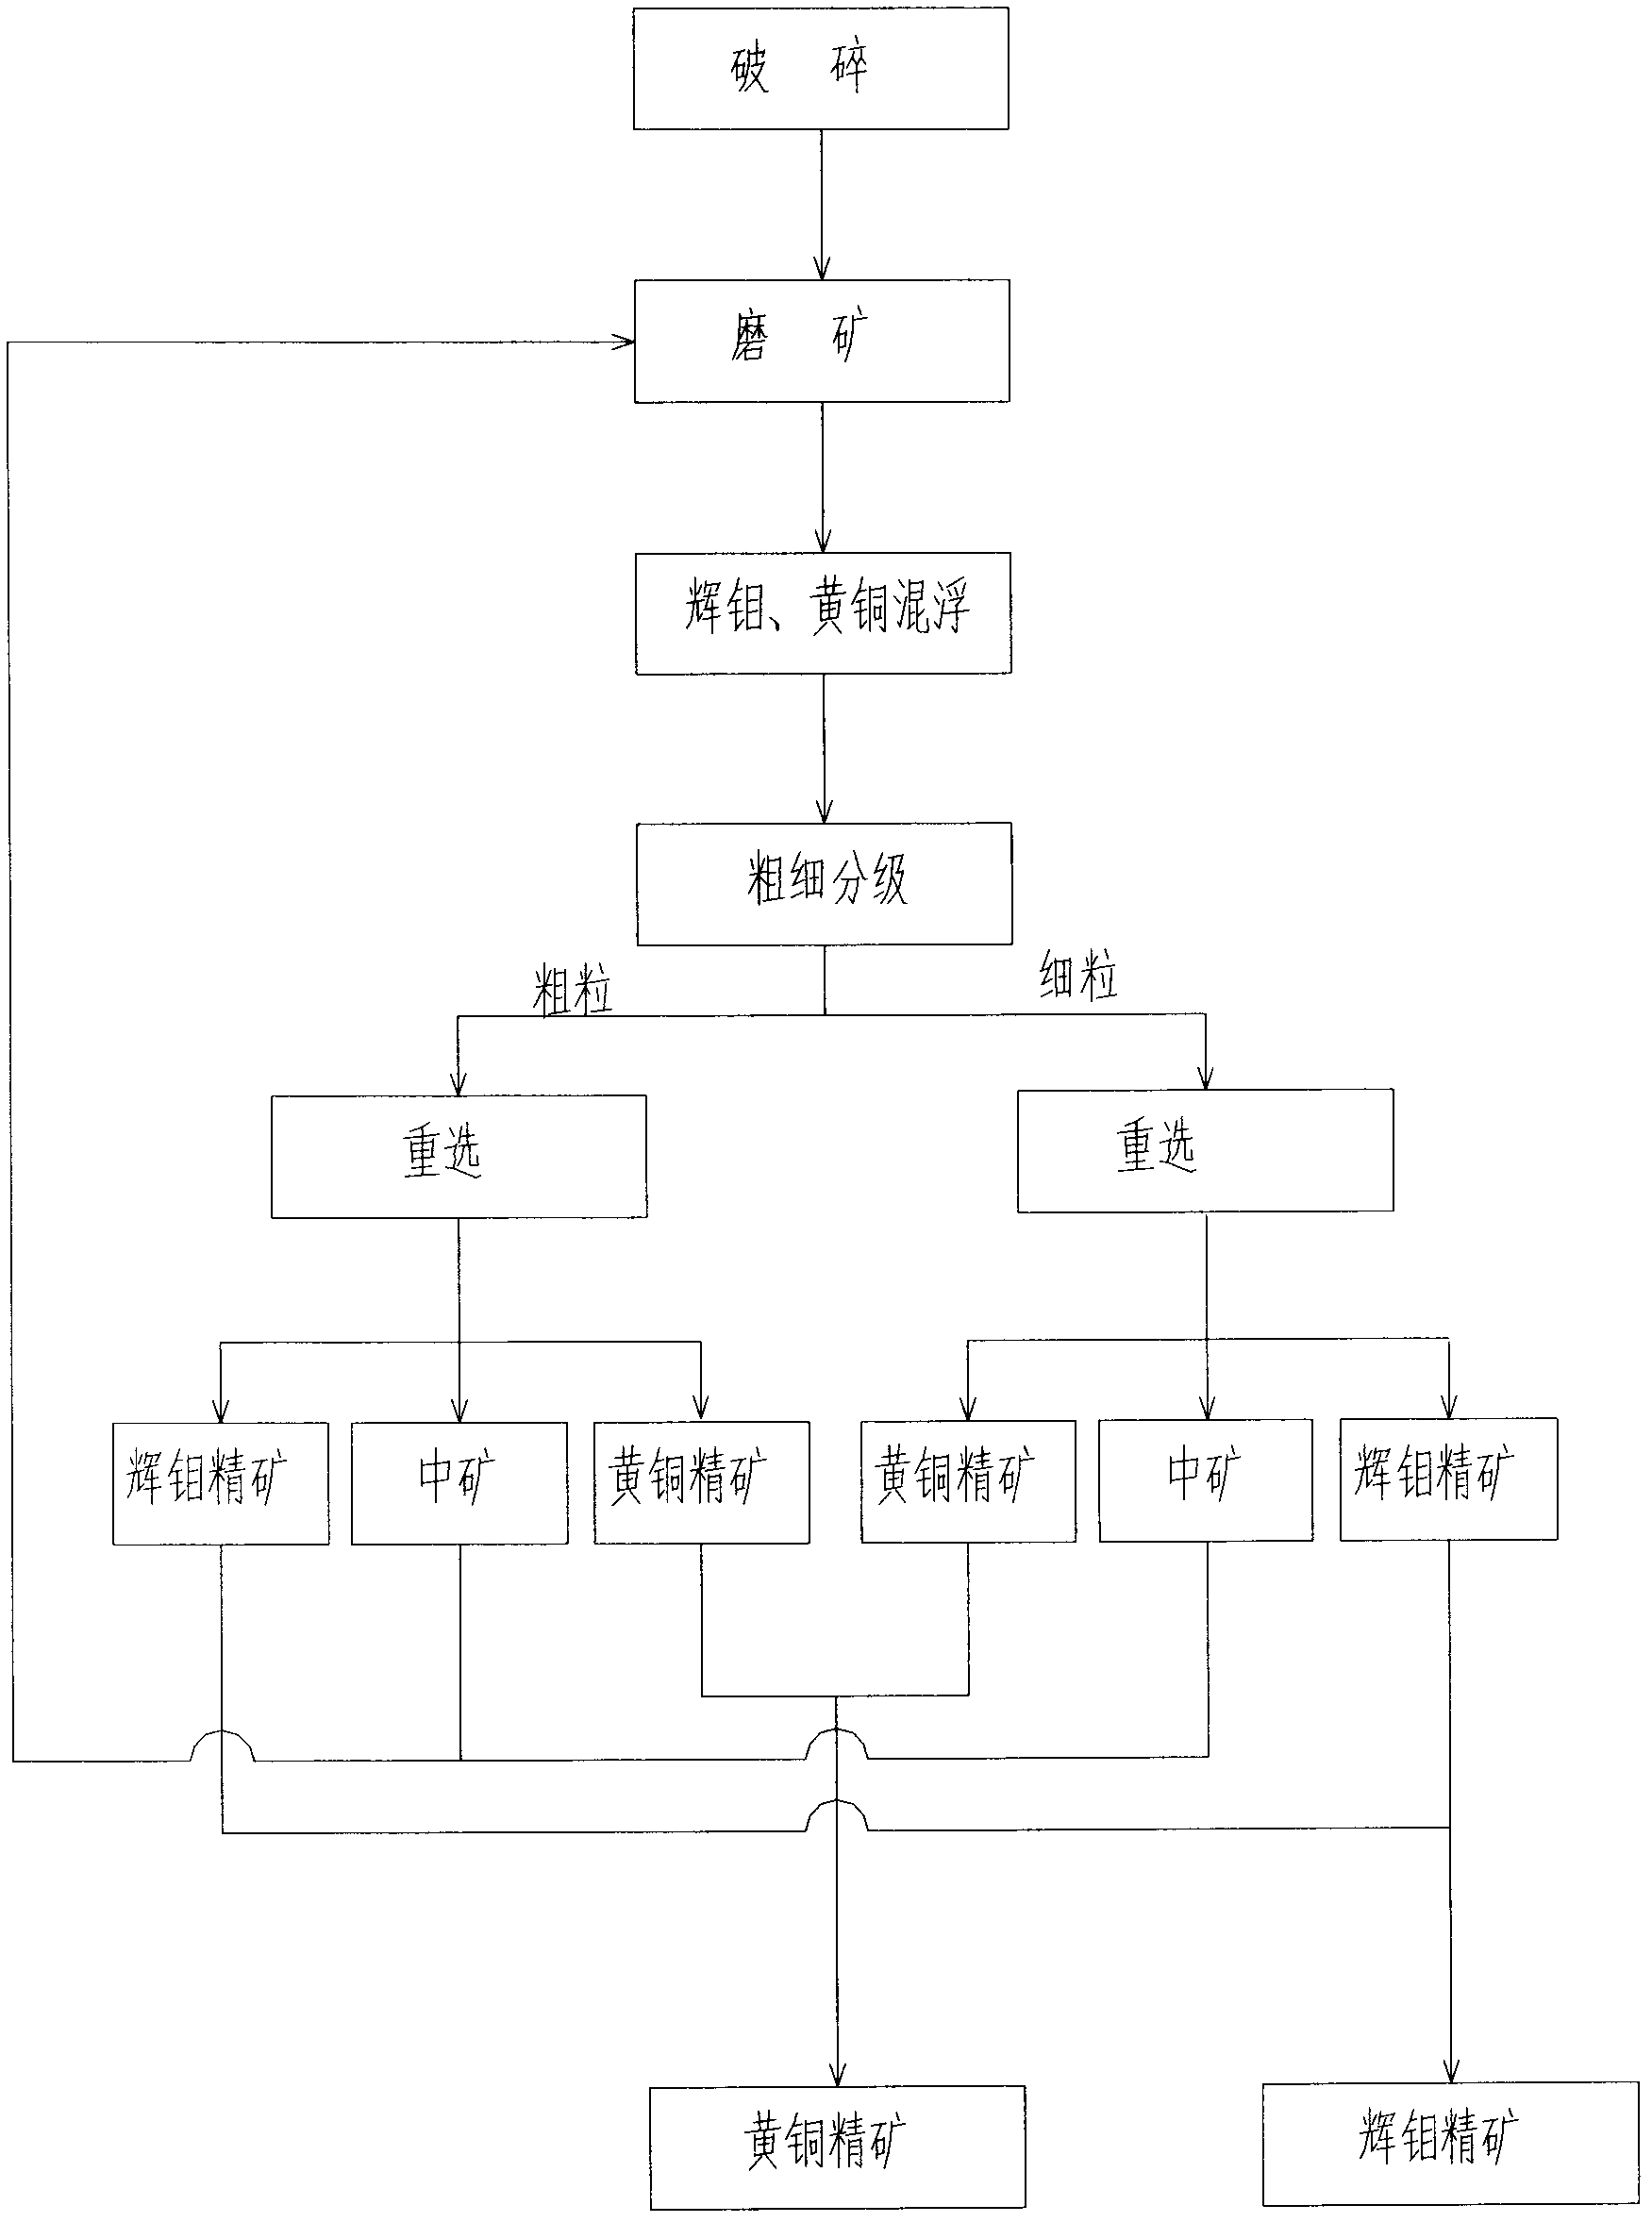 Method for separating bright molybdenum and brass in refractory molybdenum copper sulphide ore